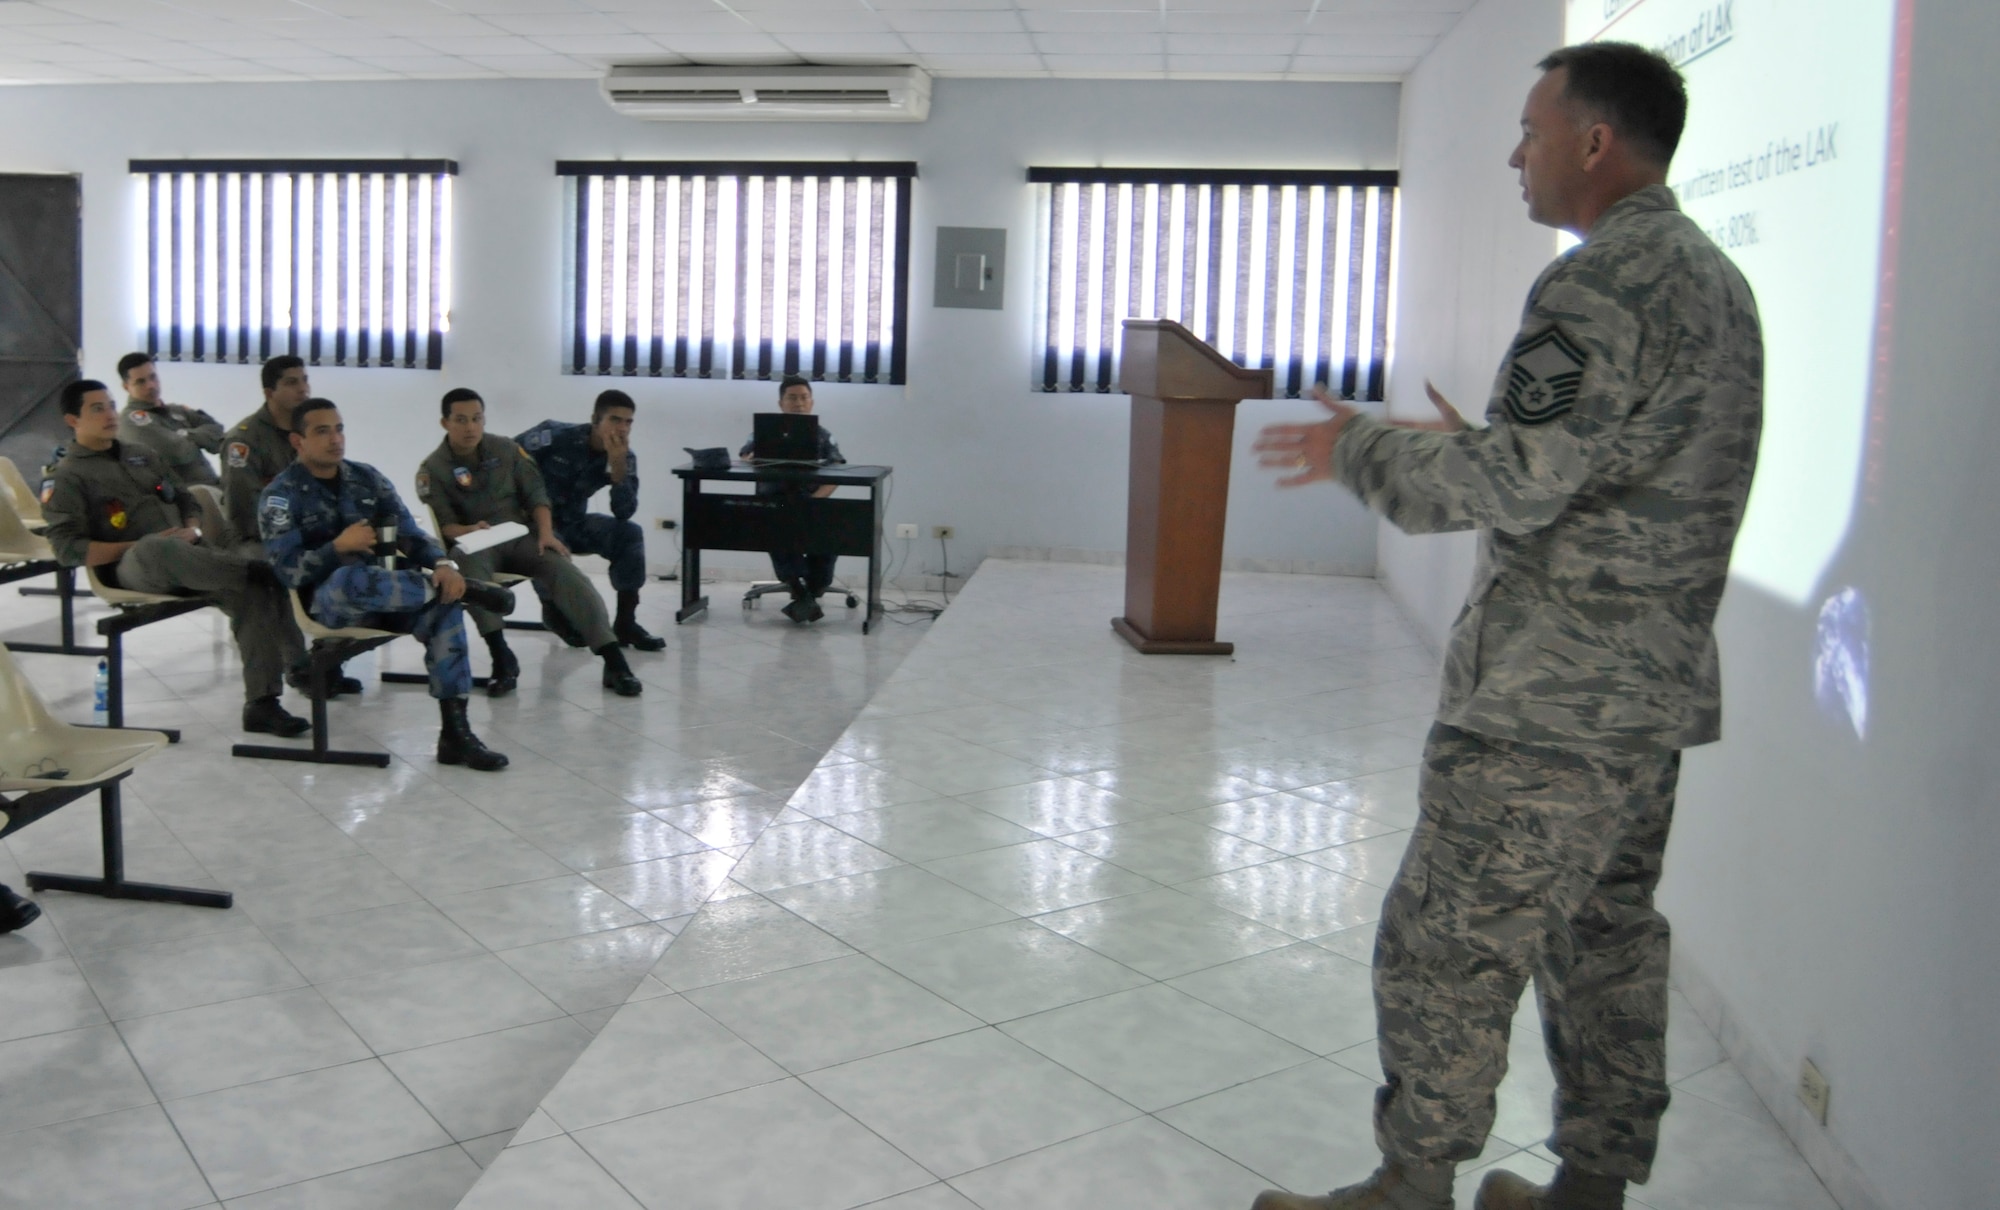 Senior Master Sgt. Richard Reed, 260th Air Traffic Control Squadron, briefs El Salvadoran Air Force air traffic controllers on how the Air National Guard trains their own air traffic controllers, as part of a week long Subject Matter Expert Exchange (SMEE) between the N.H. Air National Guard and the El Salvadoran Air Force, San Salvador, El Salvador, May 7 through 11, 2012.  This SMEE is part of the National Guard State Partnership Program. (Released/National Guard photo by Tech. Sgt. Aaron Vezeau)